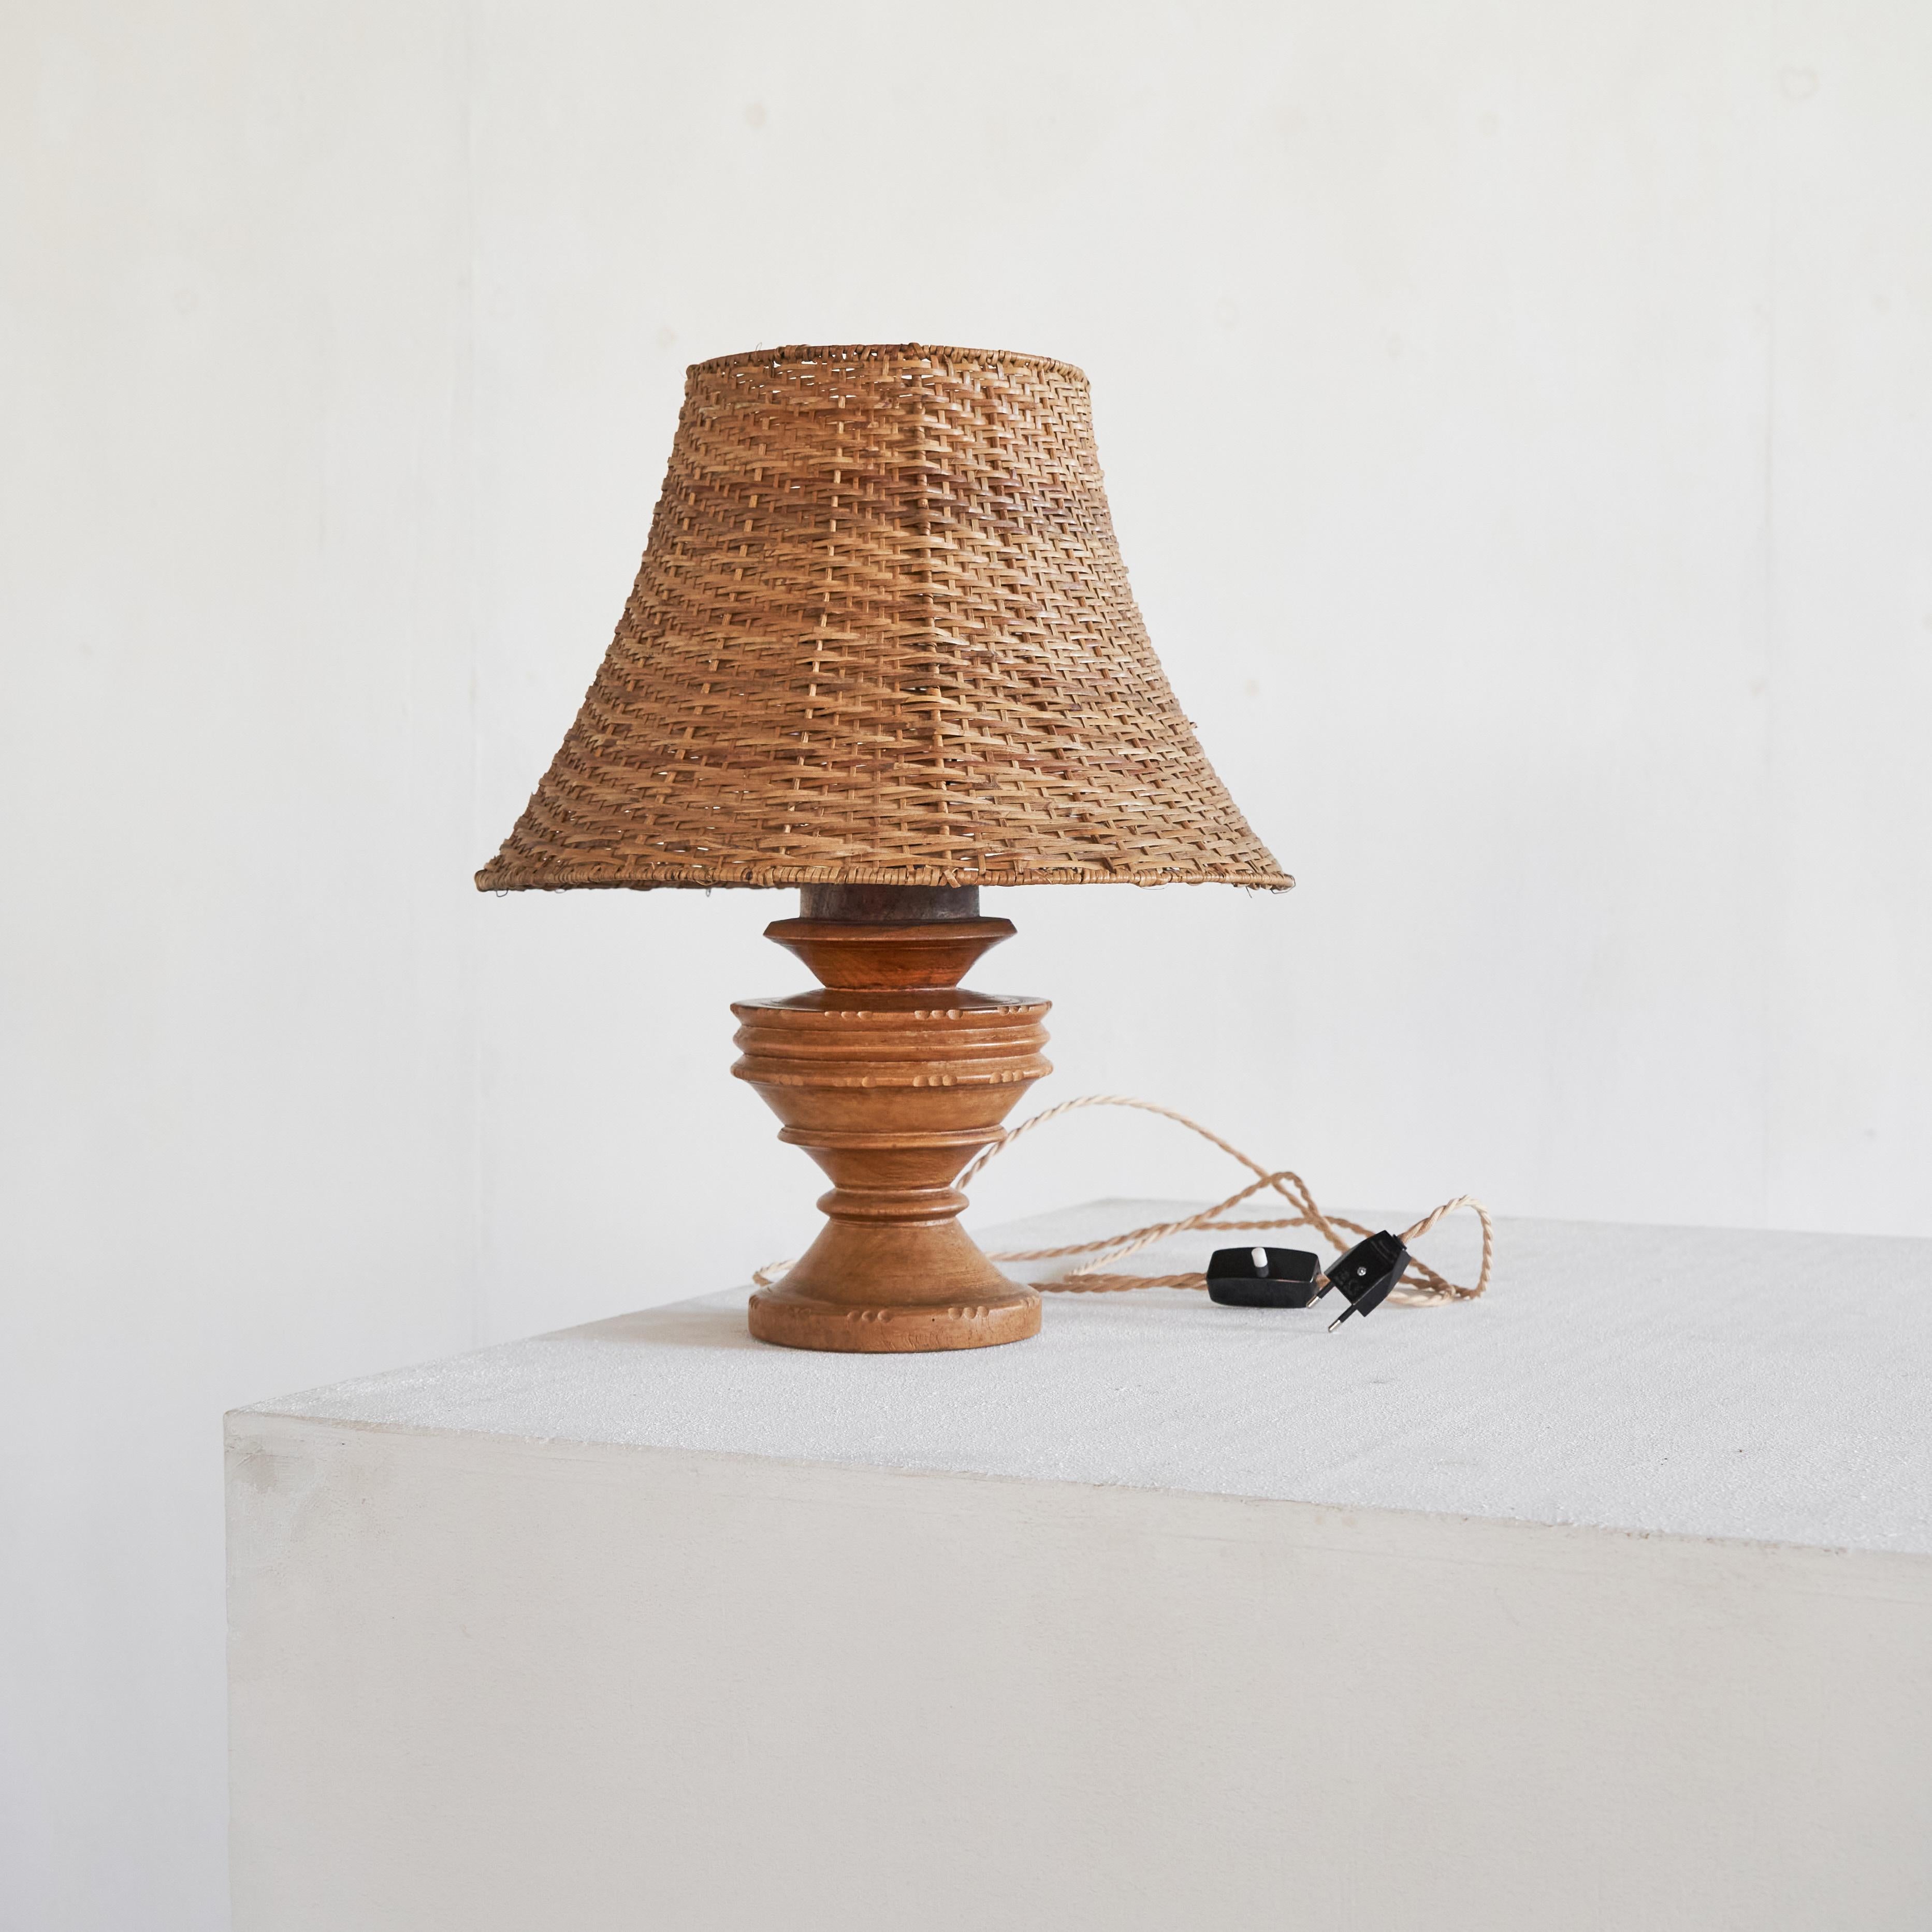 Wabi Sabi Antique Table Lamp in Turned and Carved Wood with Rattan Shade For Sale 3